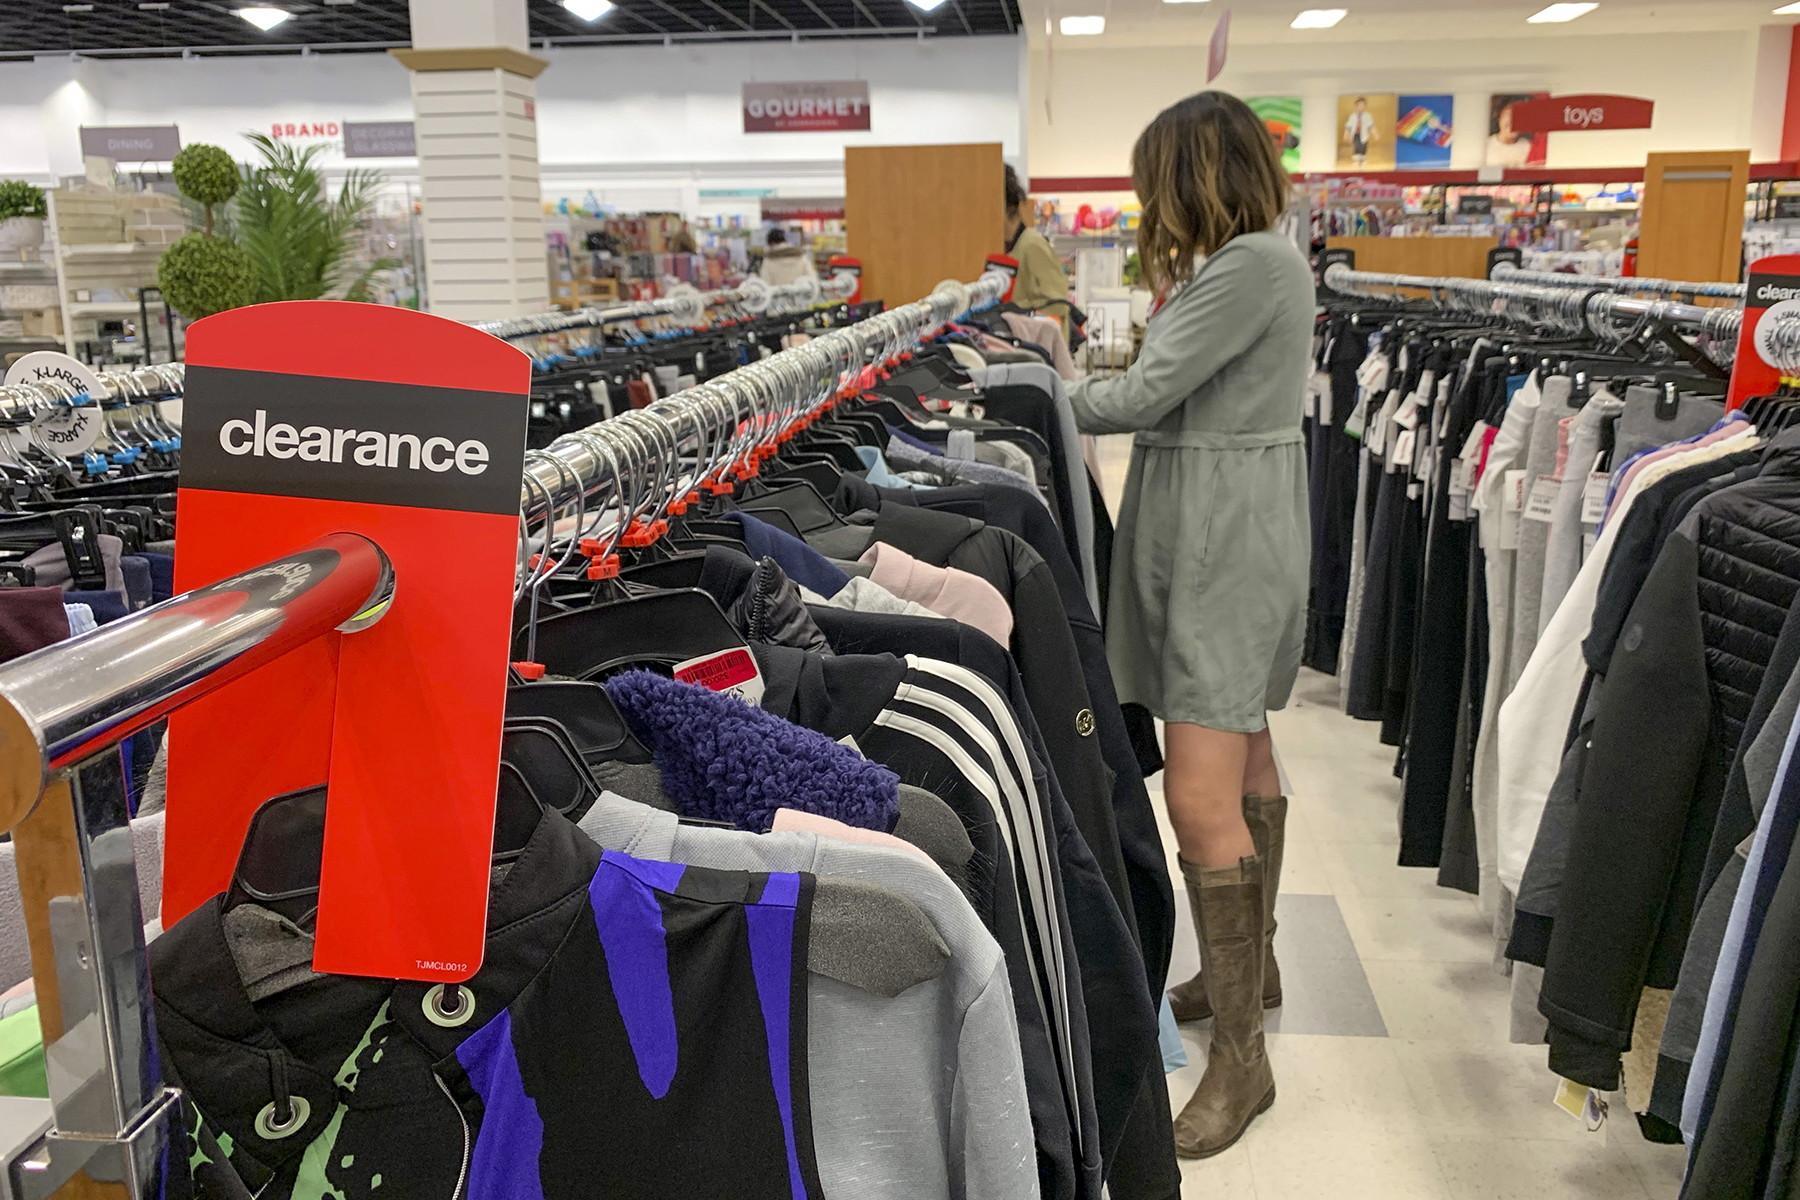 23 Freaking Amazing Ways to Save at T.J.Maxx - The Krazy Coupon Lady